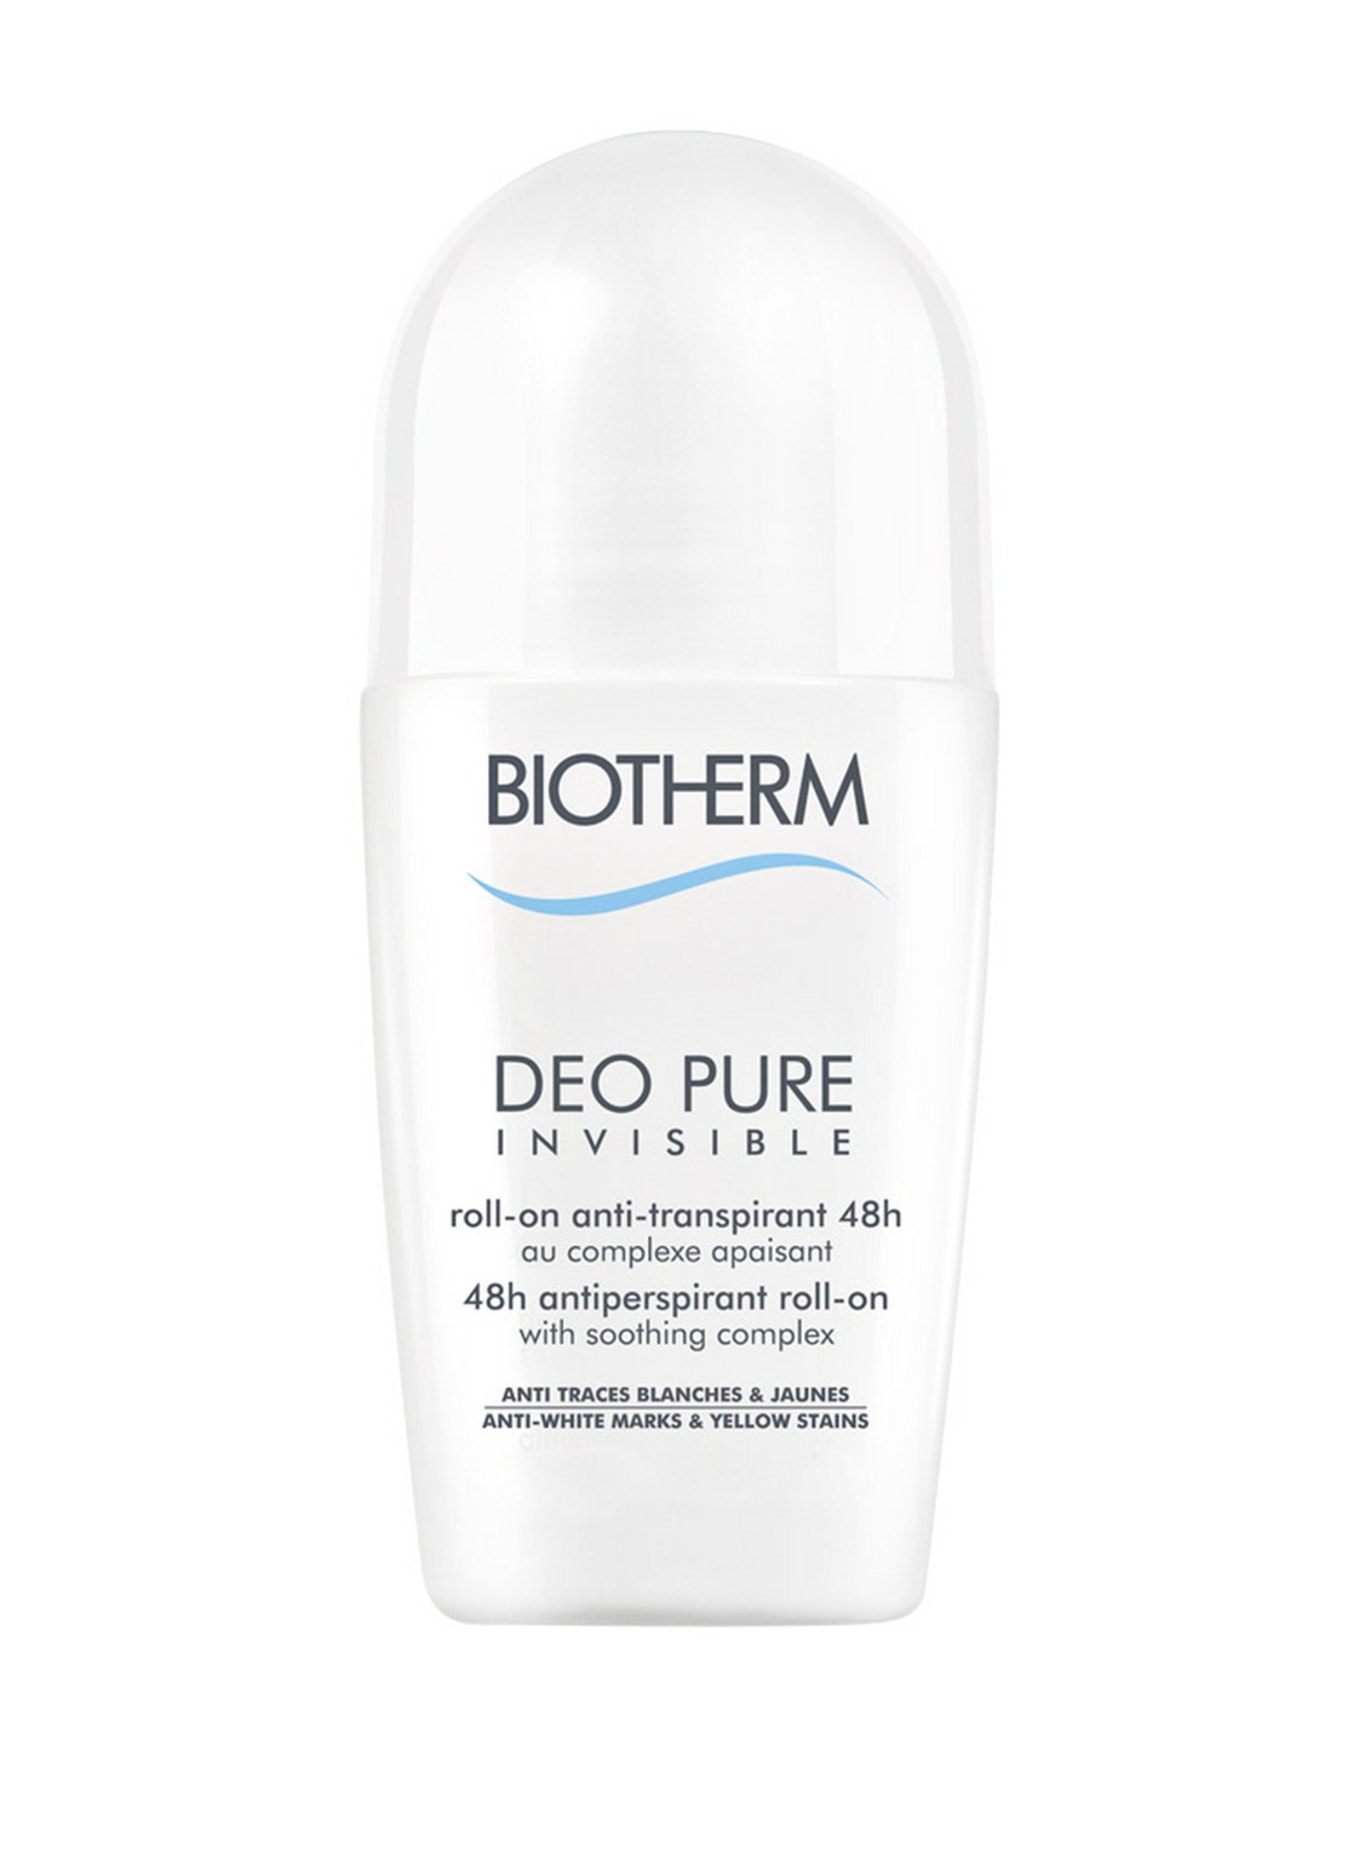 BIOTHERM DEO PURE INVISIBLE (Obrazek 1)